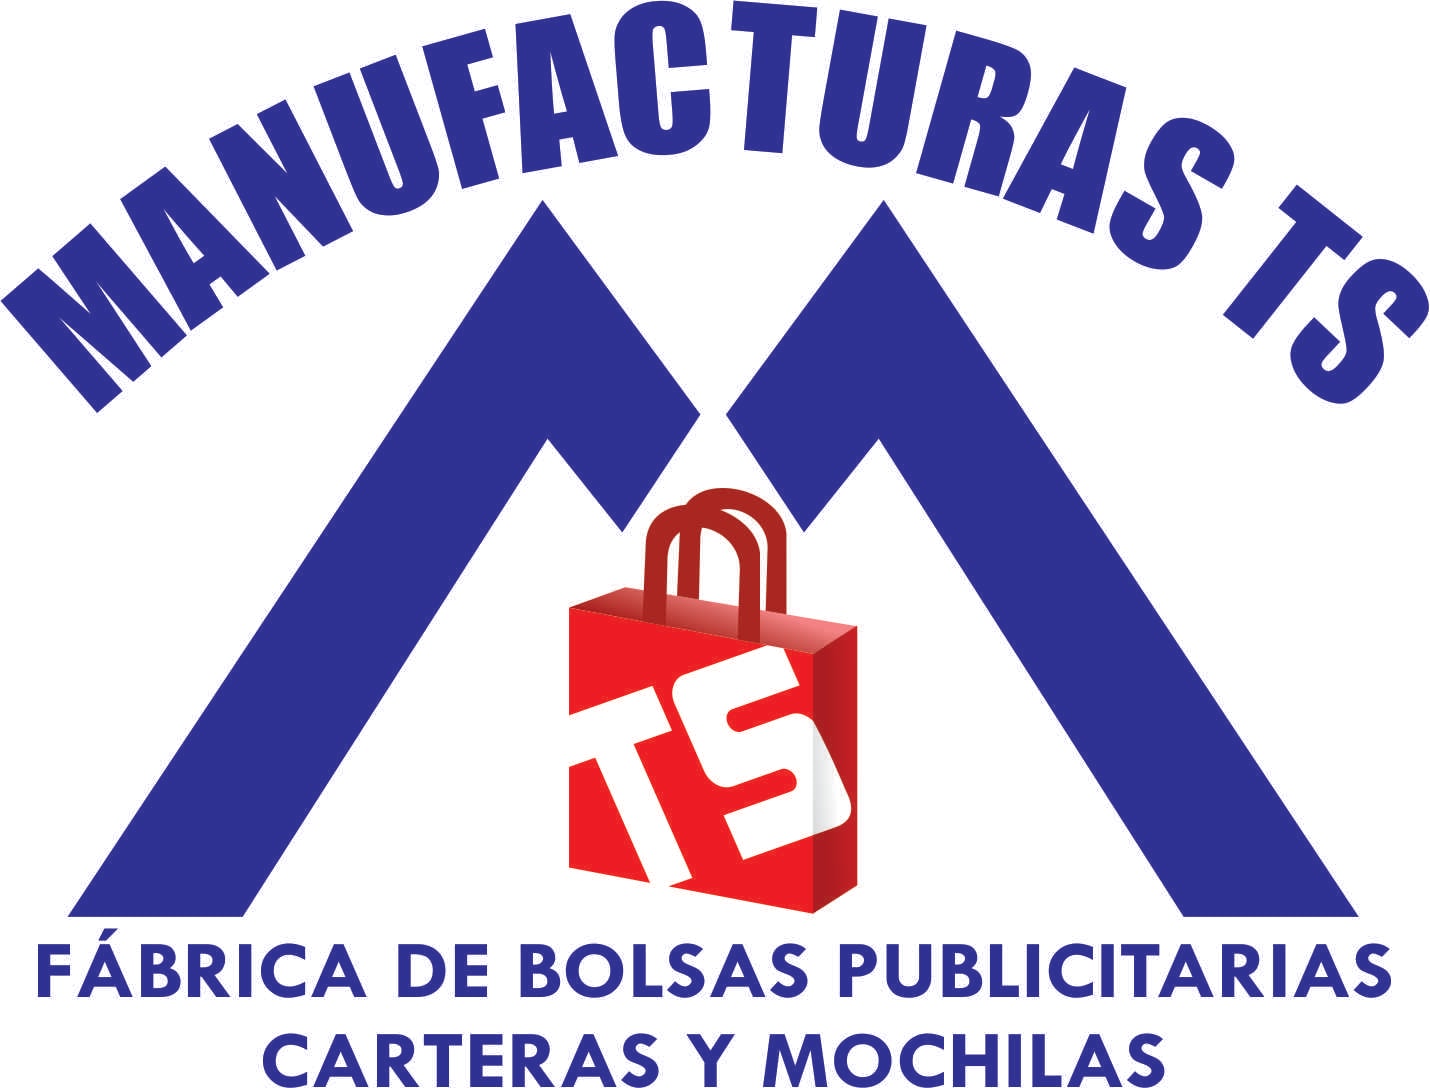 Manufacturasts